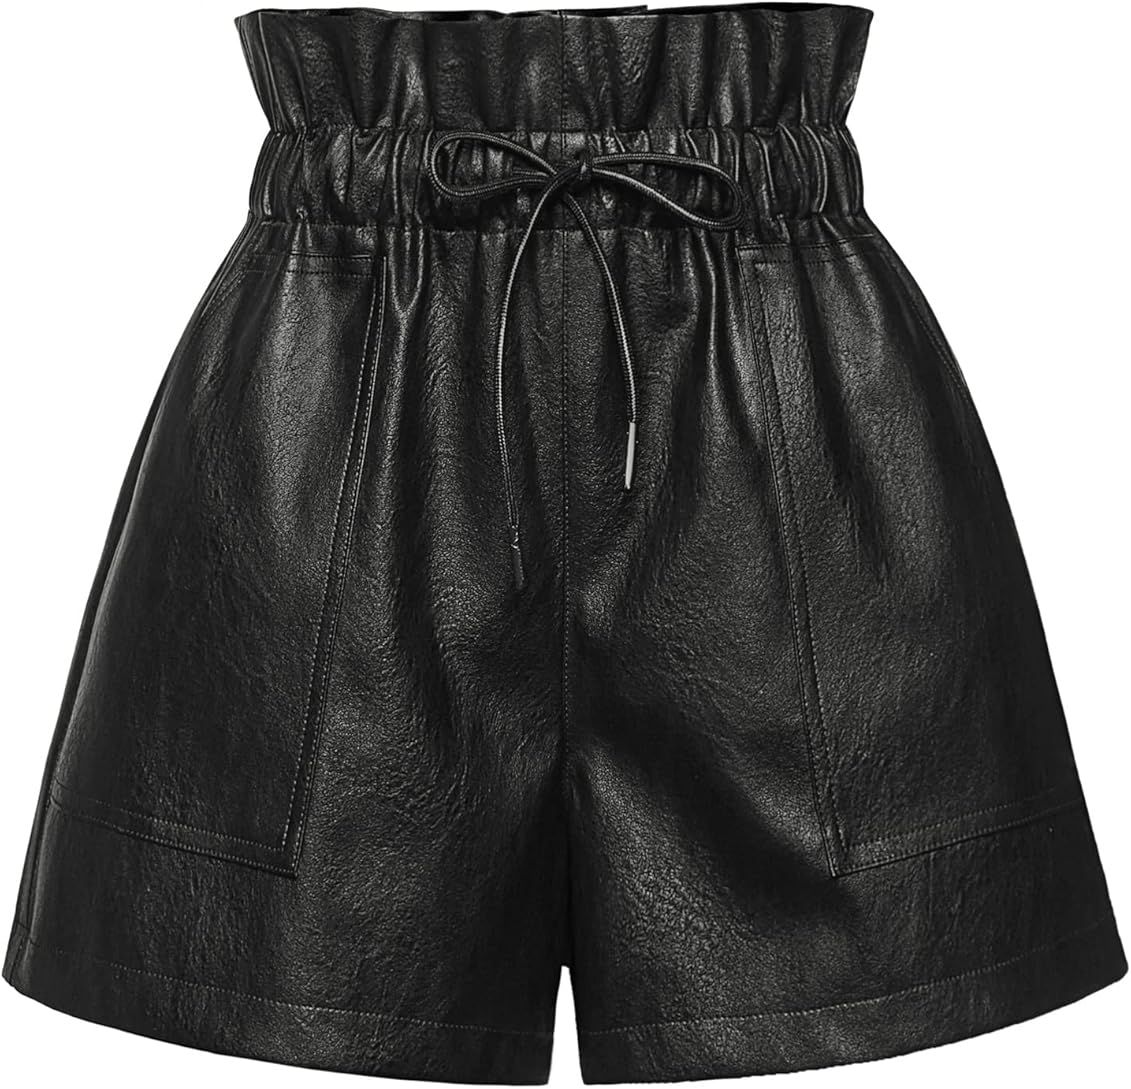 QIANXIZHAN Women's Leather Shorts, Faux High Waisted Wide Leg Sexy Shorts SP1012 | Amazon (US)